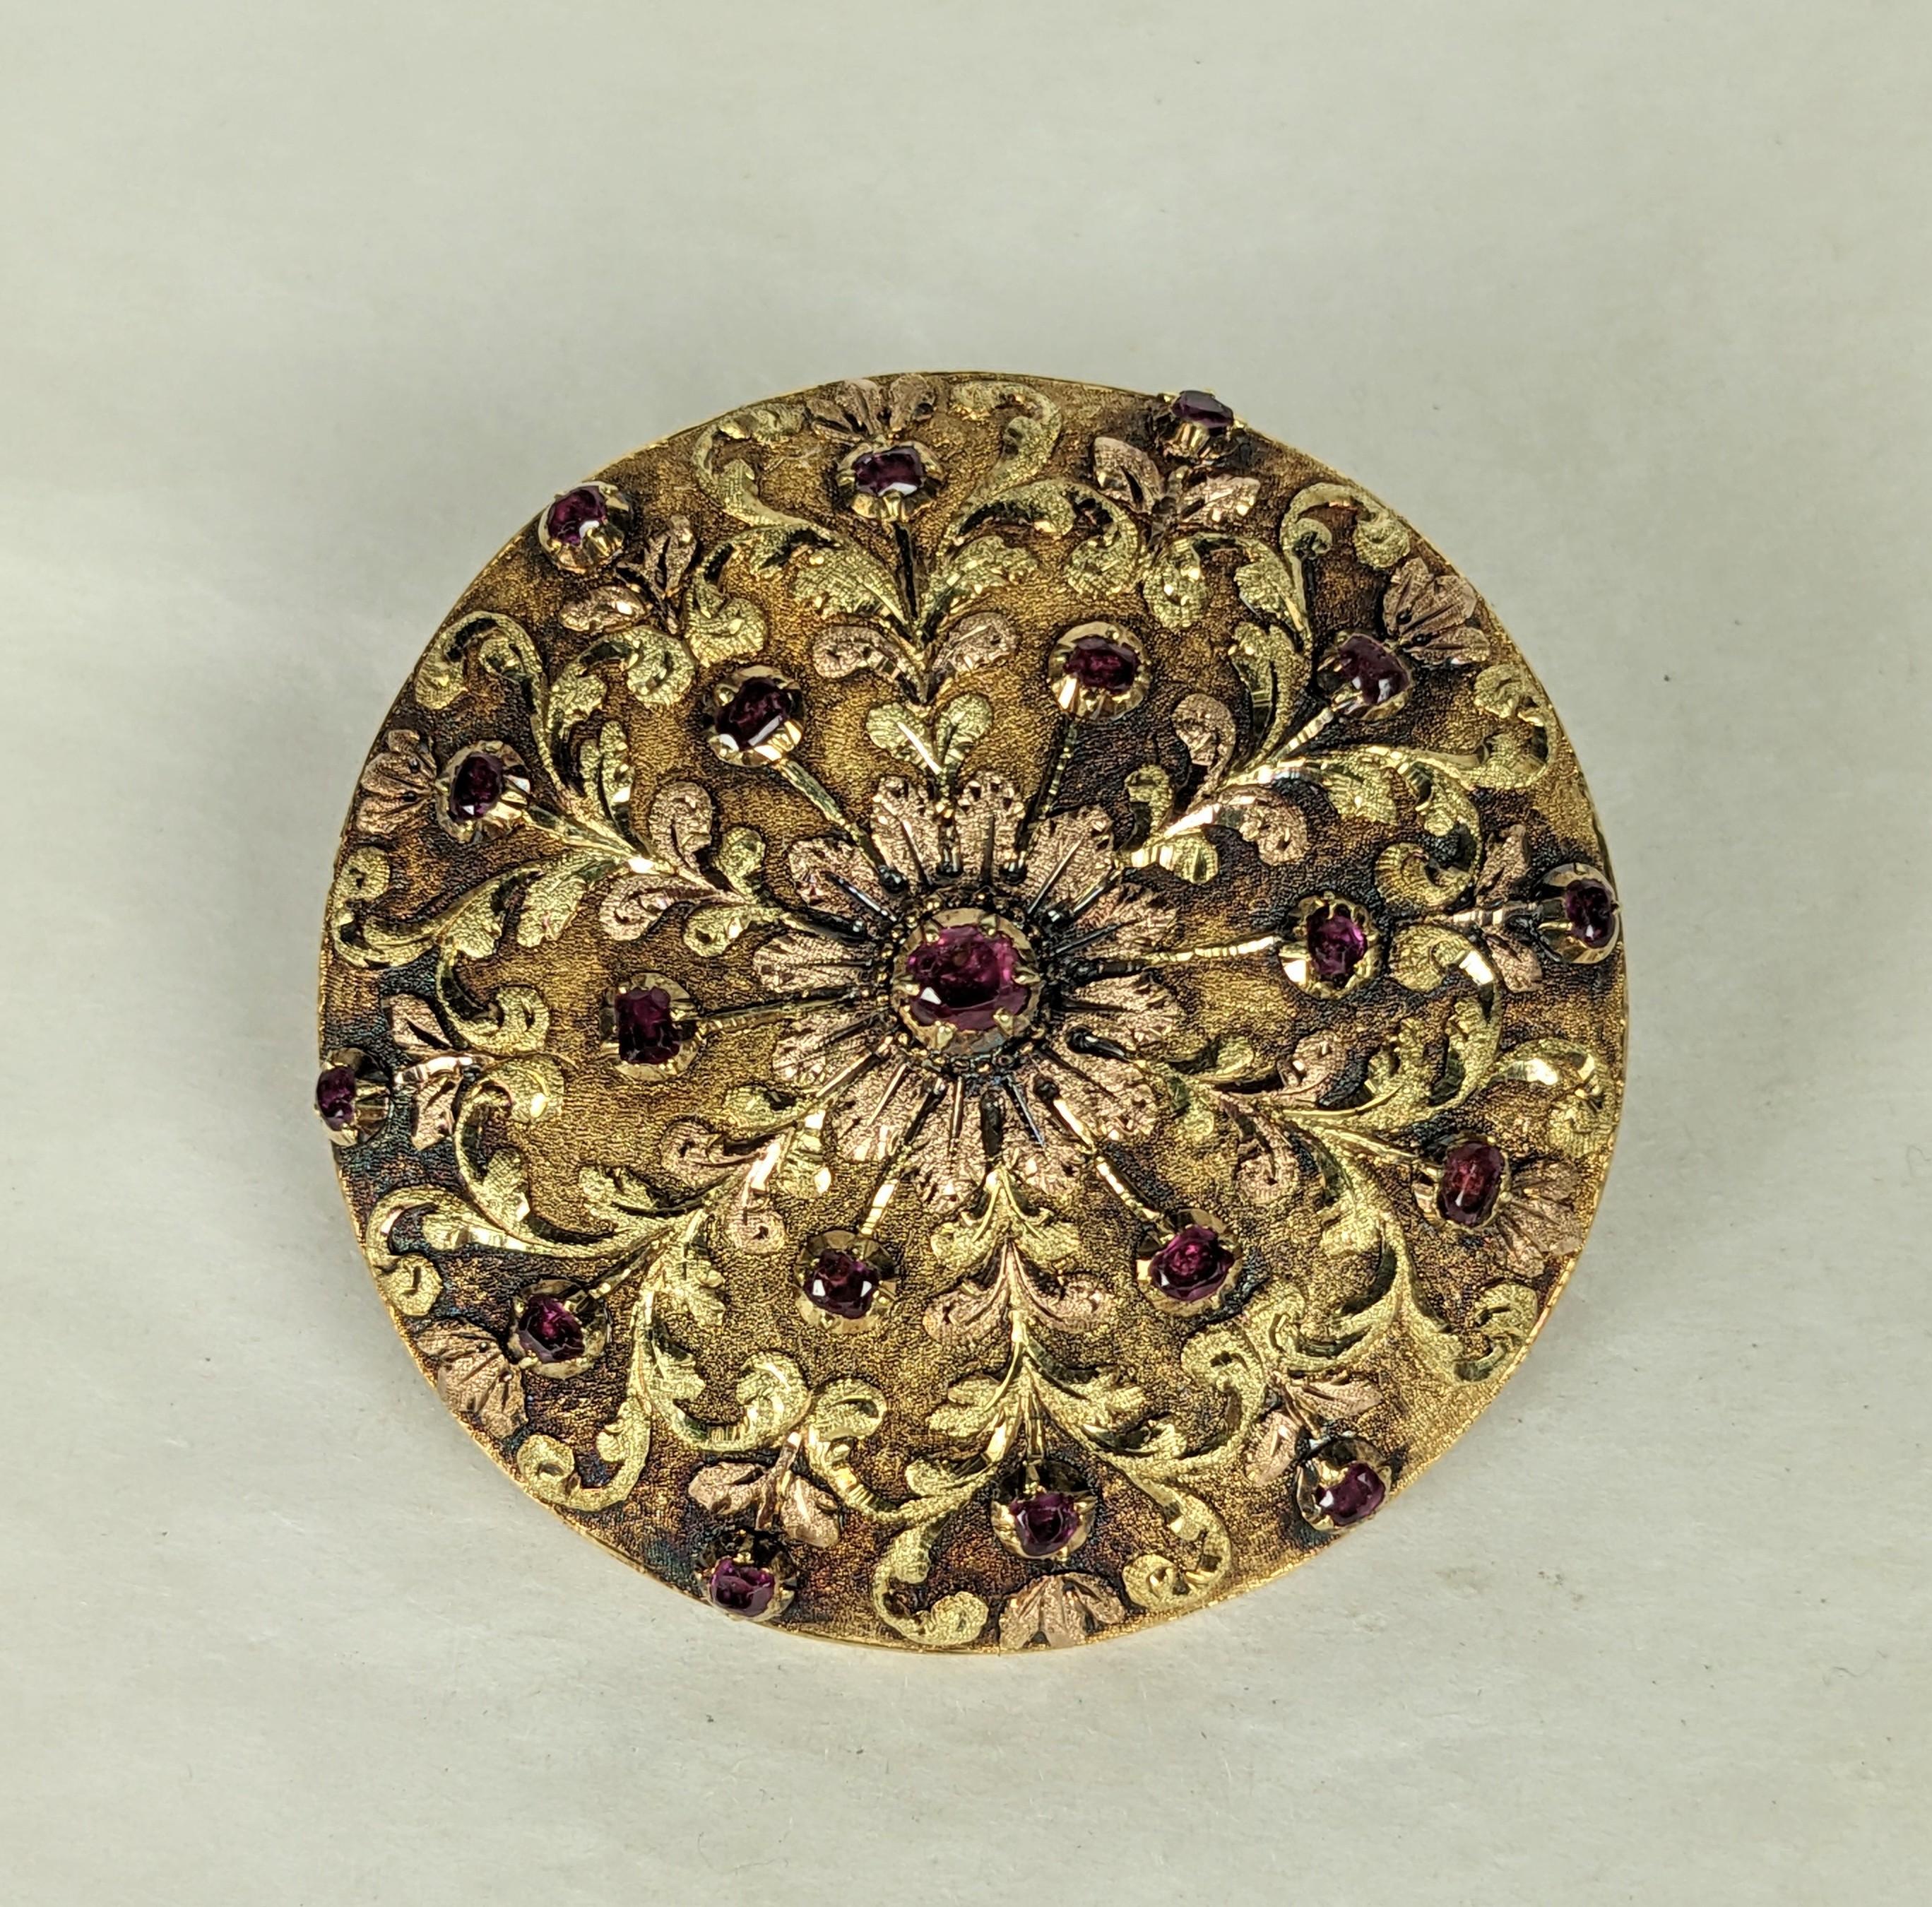 French Tri Color Gold Ruby Brooch set in 18k gold from the 19th Century, Originally a cover for a fancy pocket watch, this was converted in the period into a brooch with bale for pendant use. Intricate hand made gold work in green, pink and yellow